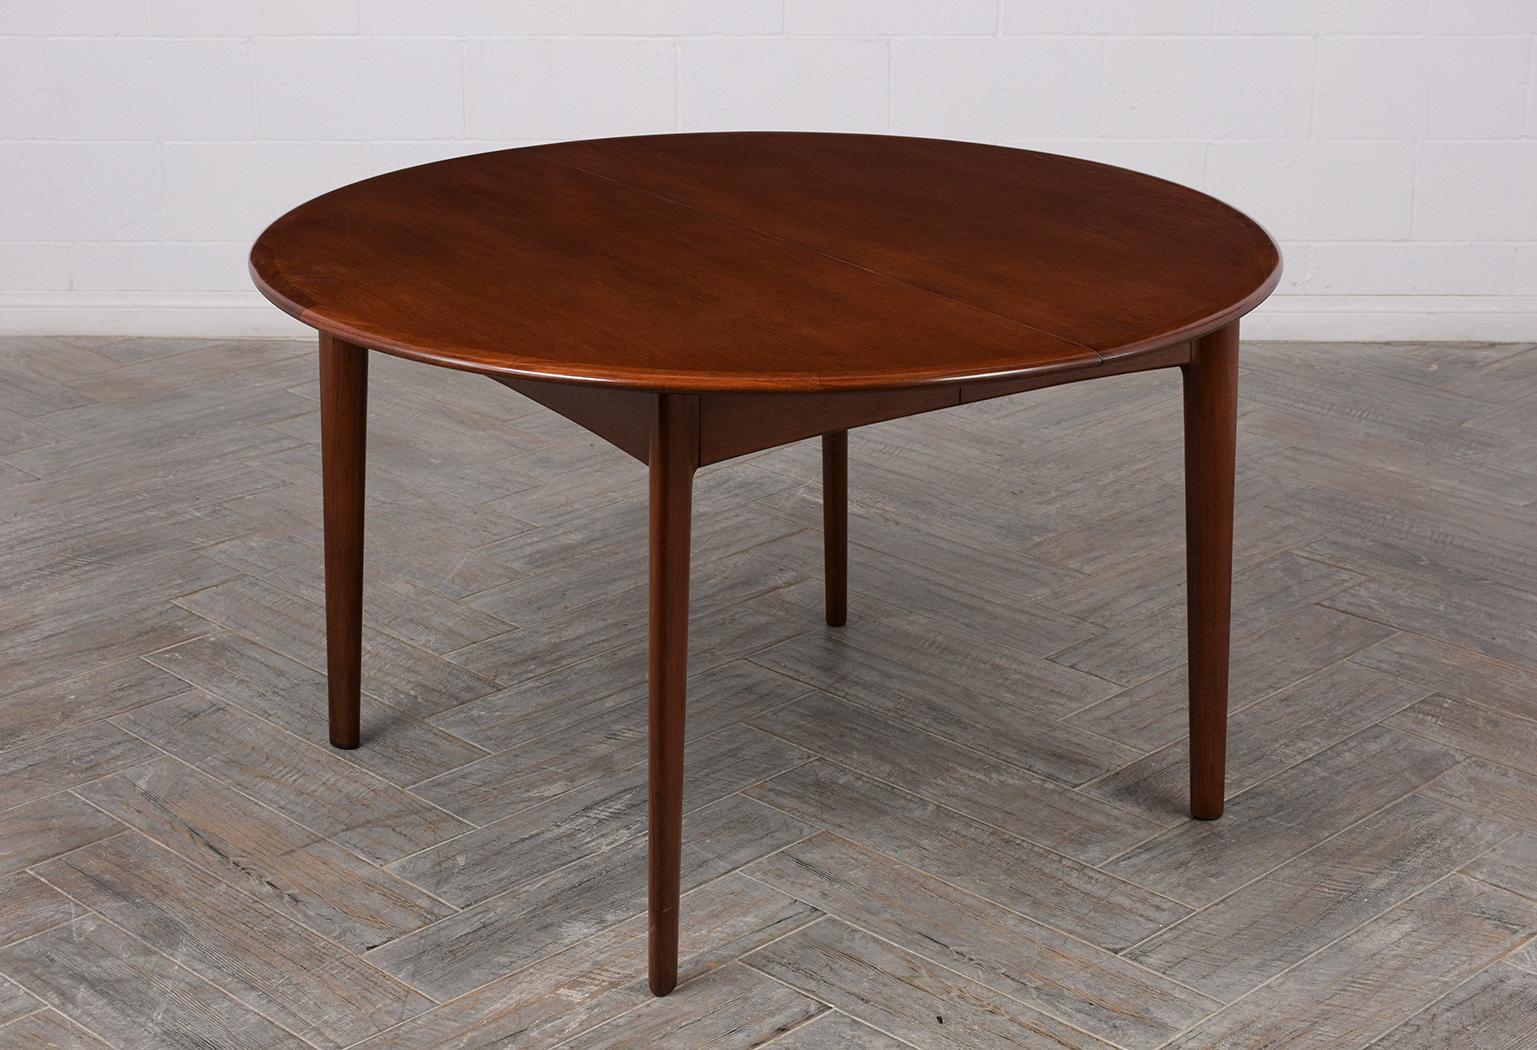 Wood Danish Mid-Century Modern Lacquered Dining Table